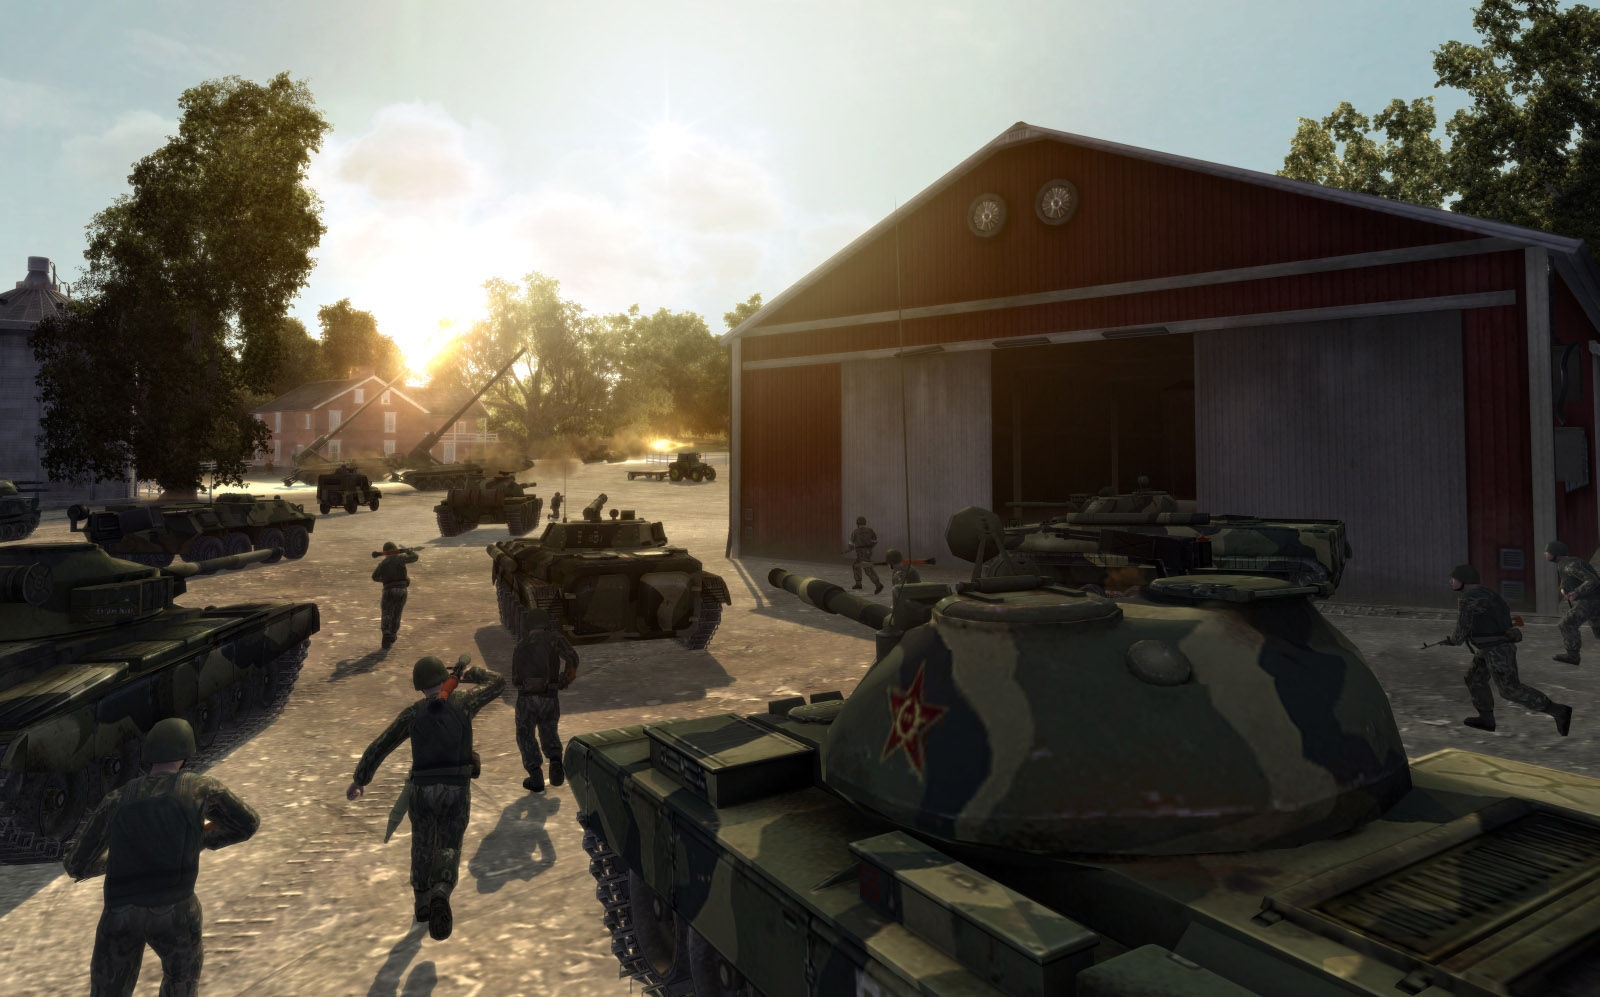 Юнит ворлд. World in Conflict. Игра World in Conflict. World in Conflict: Soviet Assault. World in Conflict армия СССР.